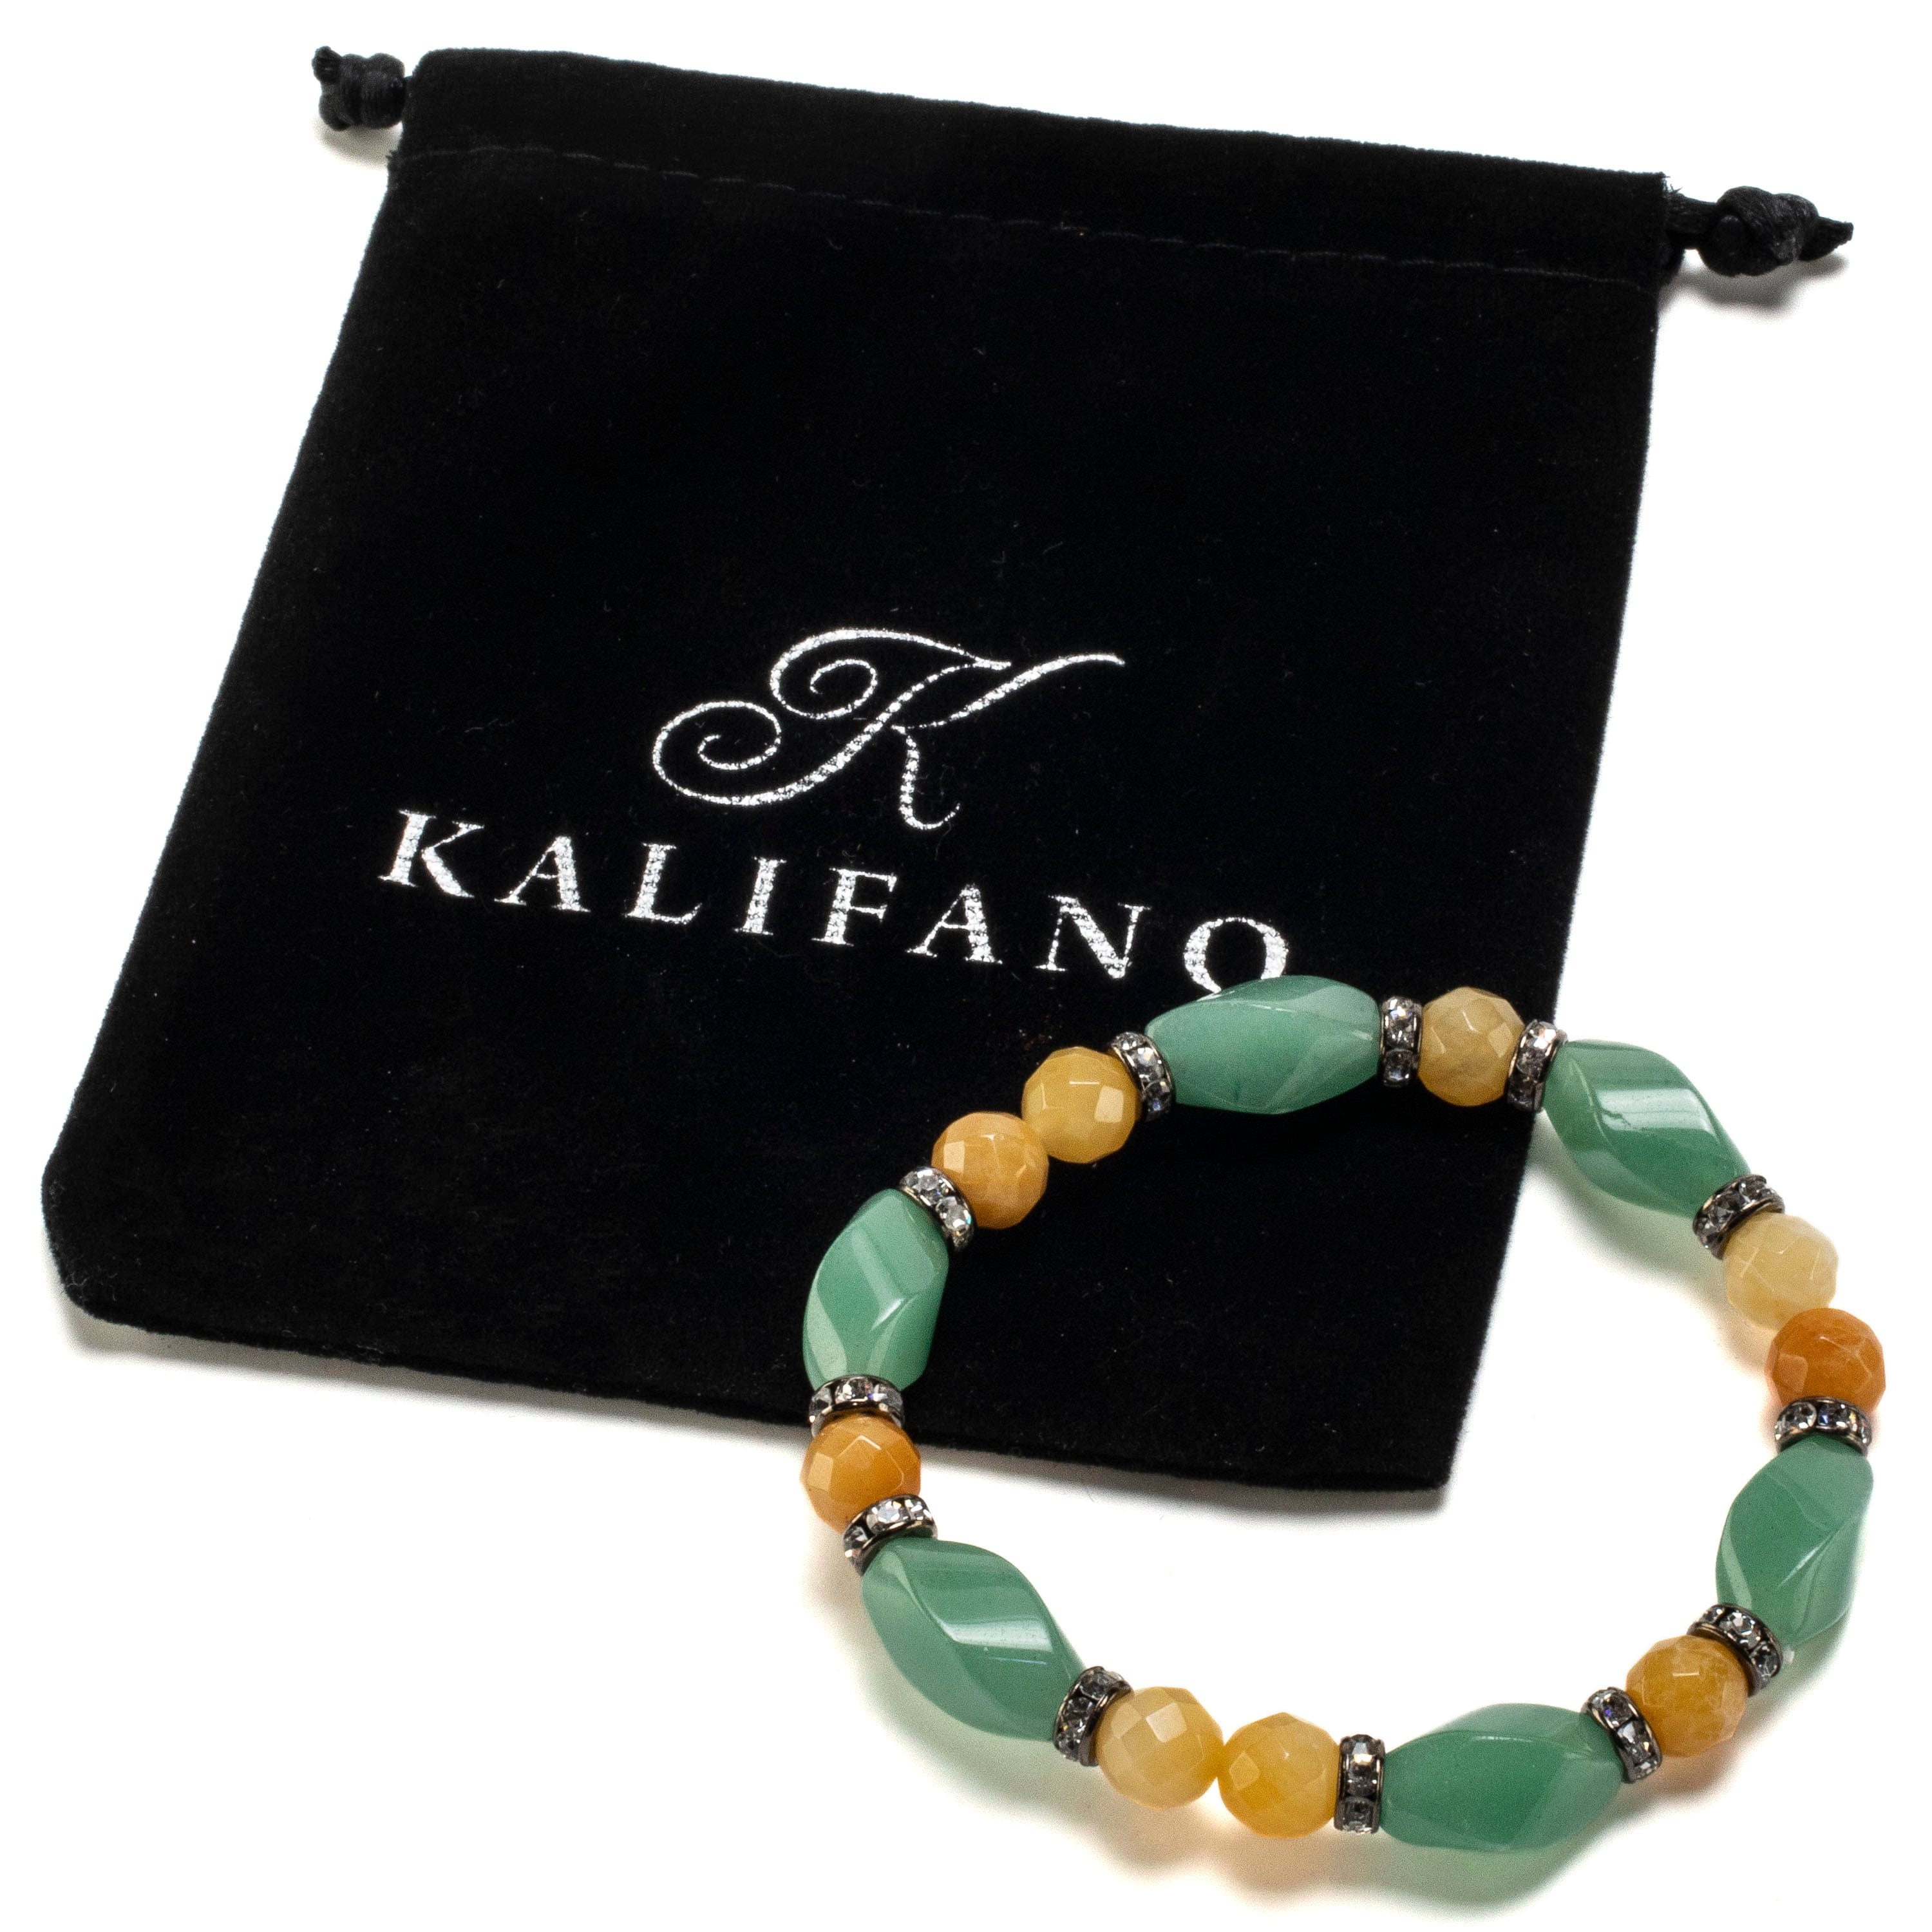 Kalifano Gemstone Bracelets Aventurine Twisted Bead and Round Faceted Butter Jade with Crystal Accent Beads Gemstone Elastic Bracelet BLUE-BGP-020